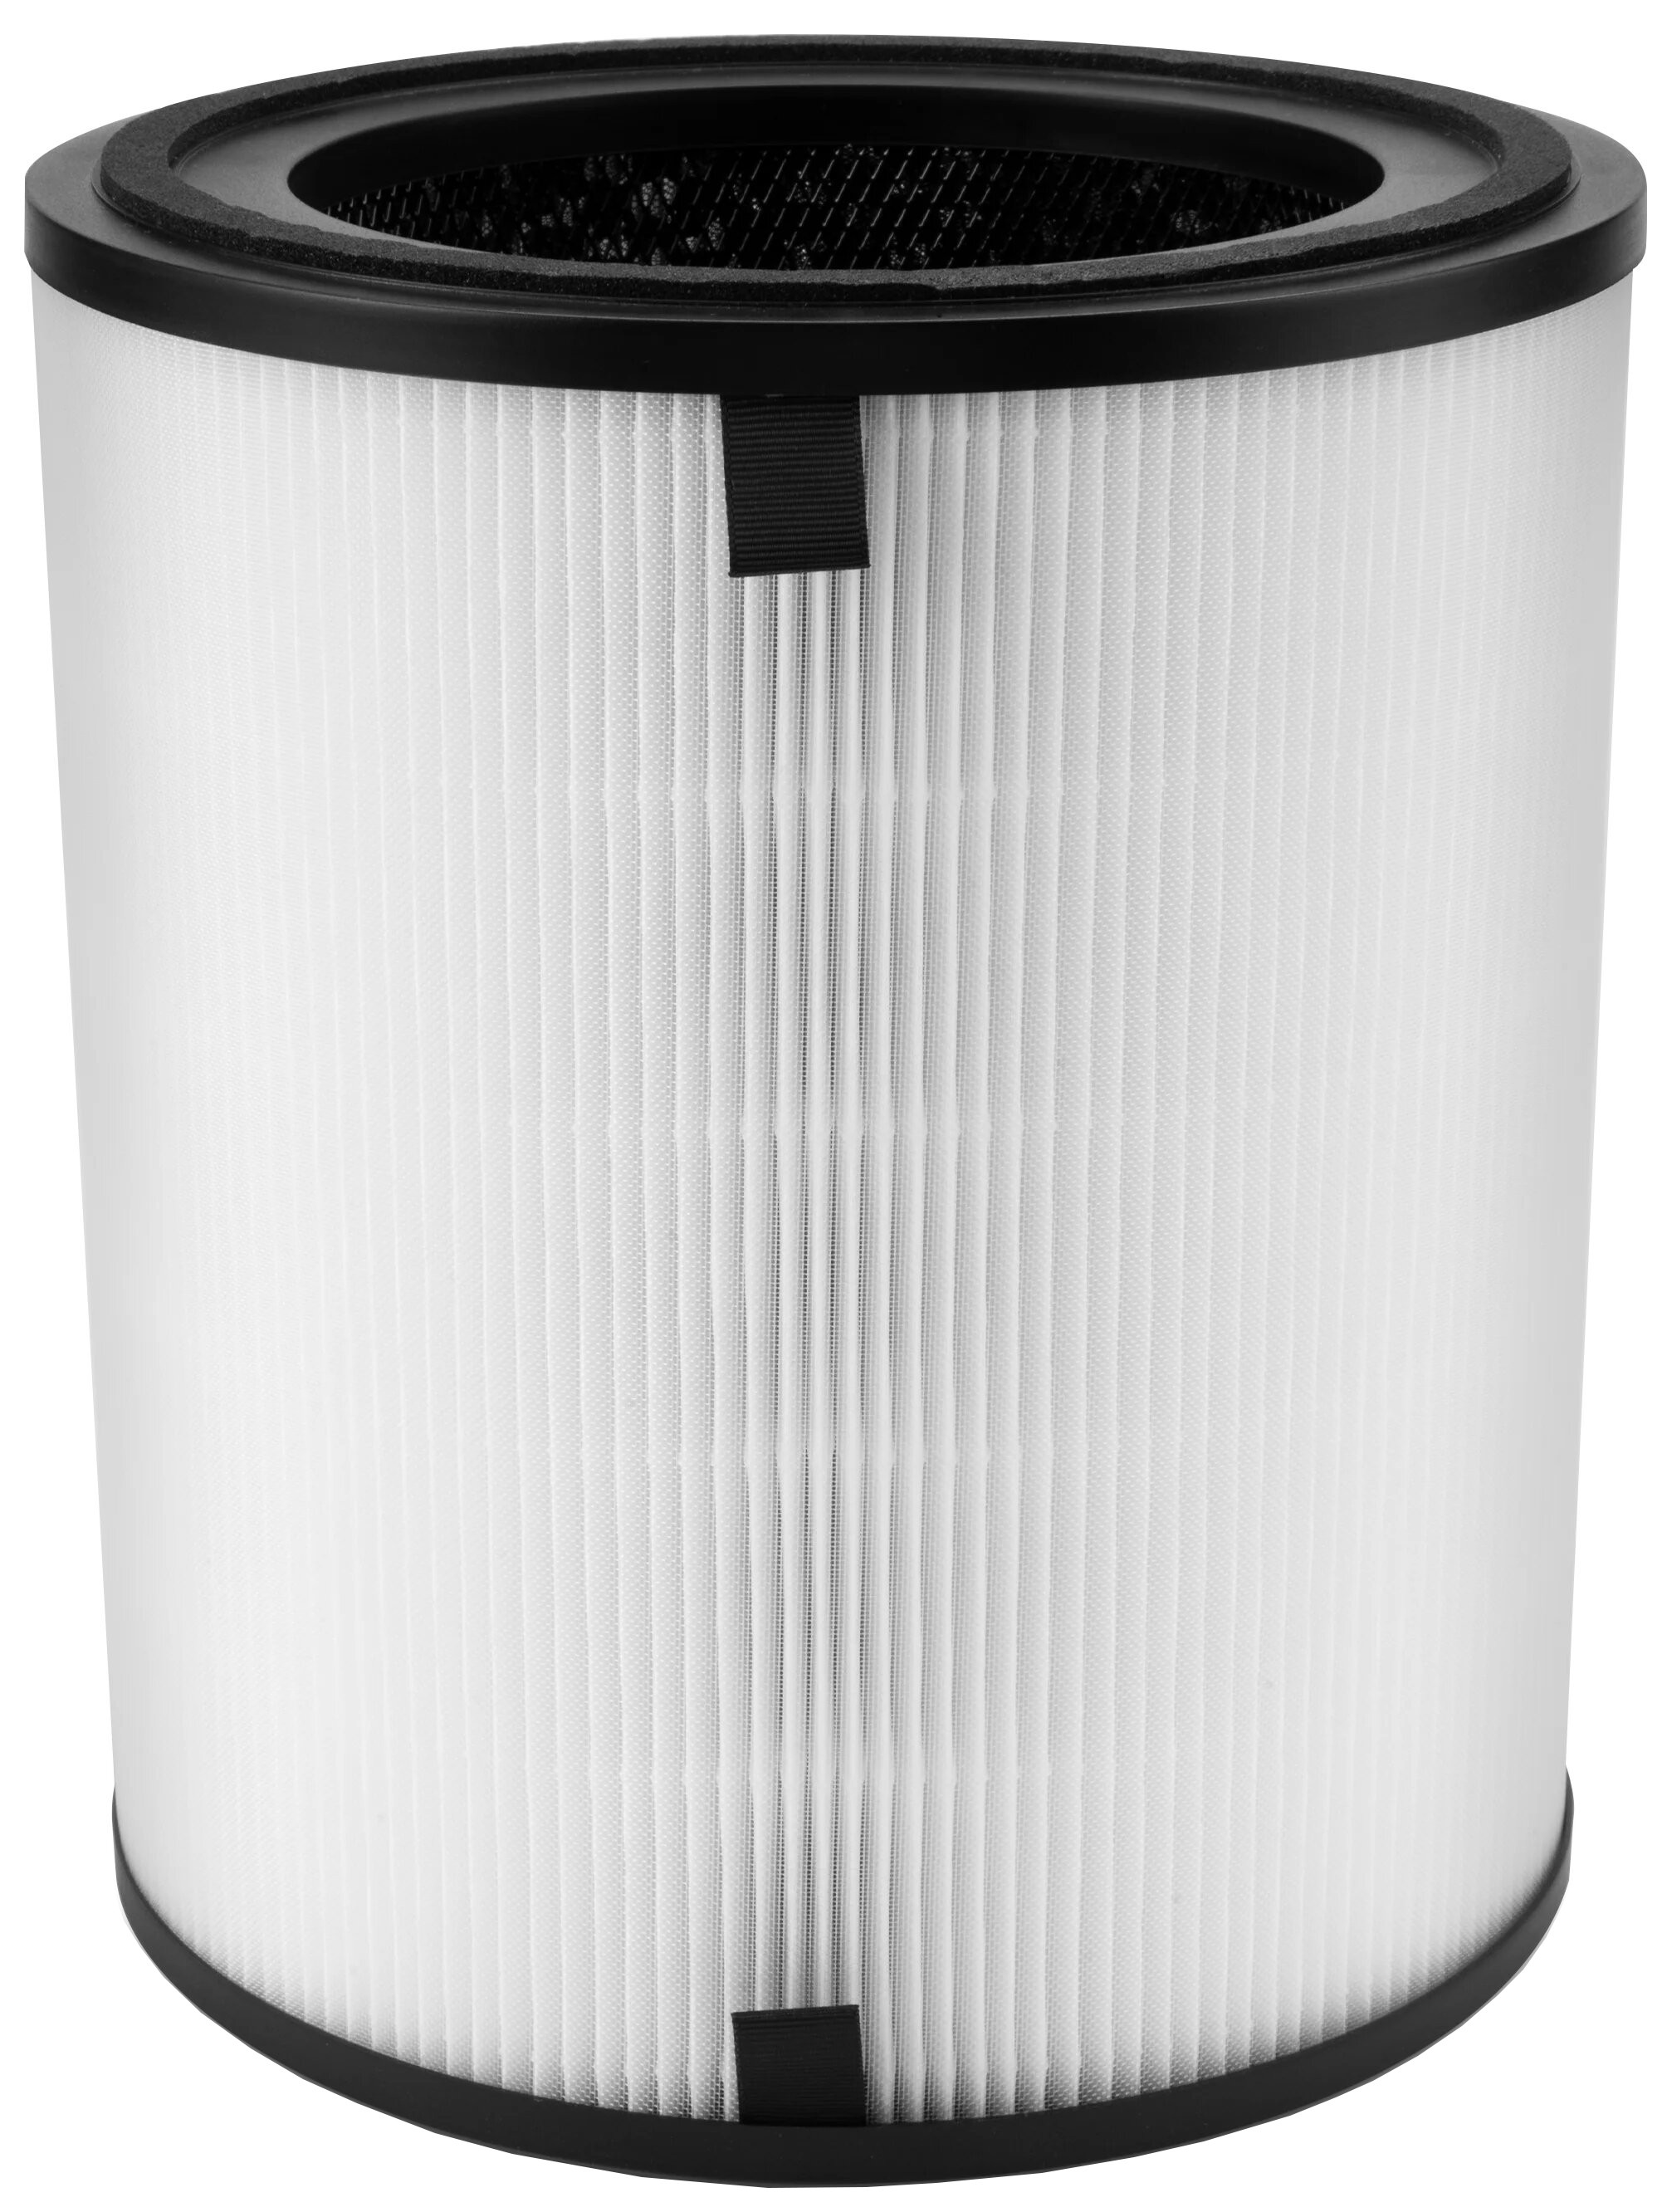 Levoit Air Cleaner Filter LV-H133 Tower True HEPA 3-Stage (HEACAFLVNEA0034)